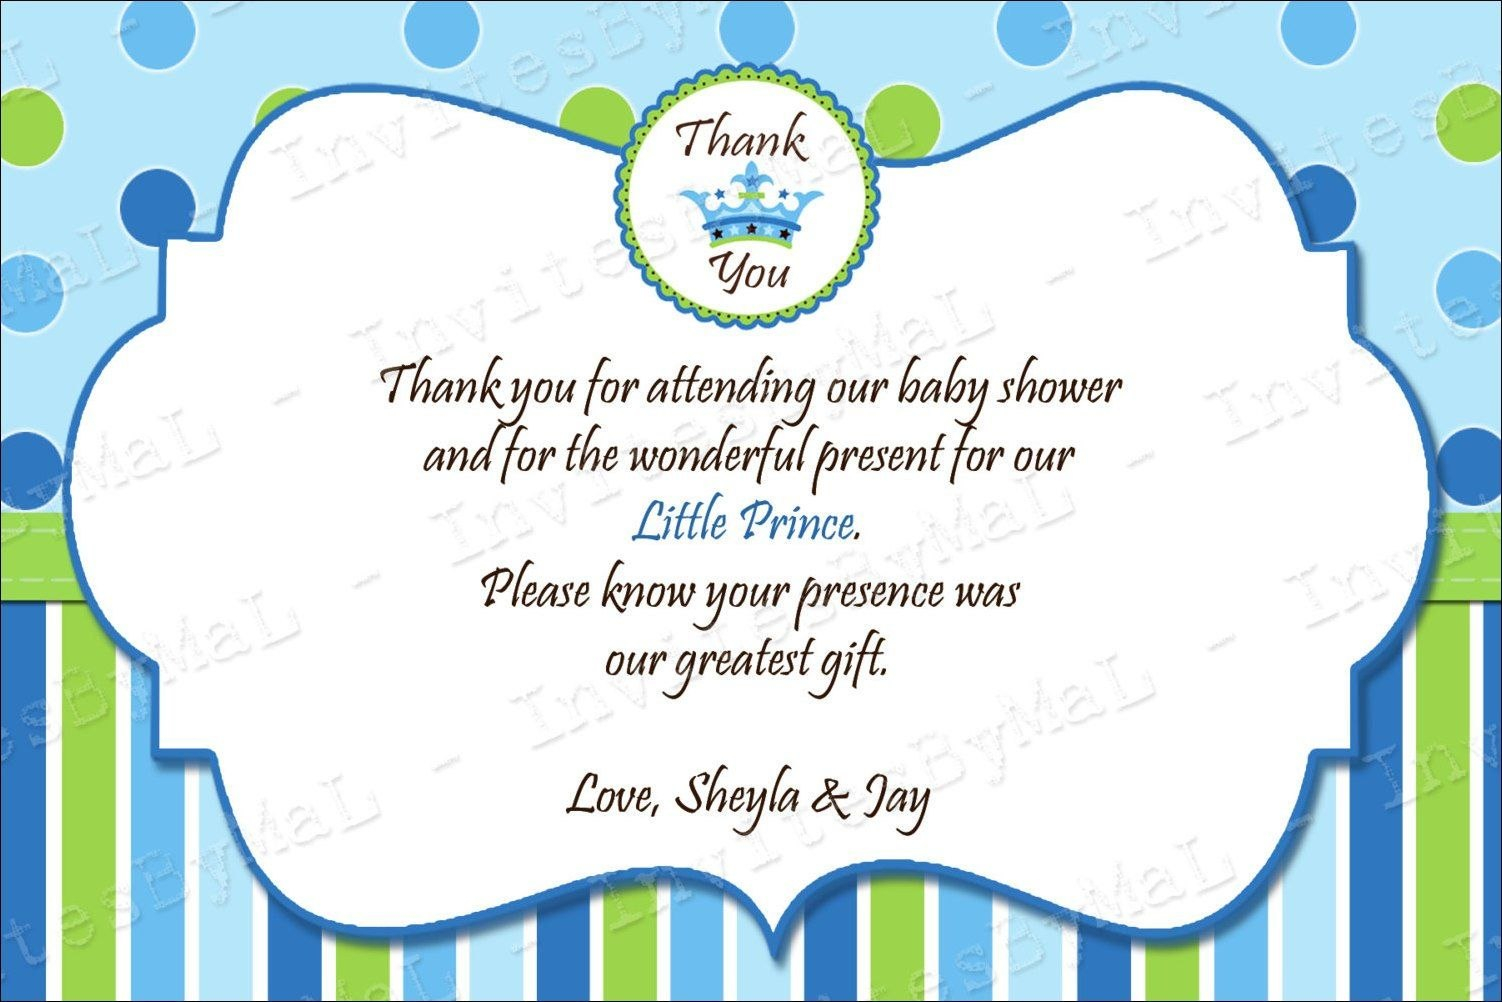 Beautiful Baby Shower Thank You Cards Ideas  Baby  Baby Shower in Template For Baby Shower Thank You Cards